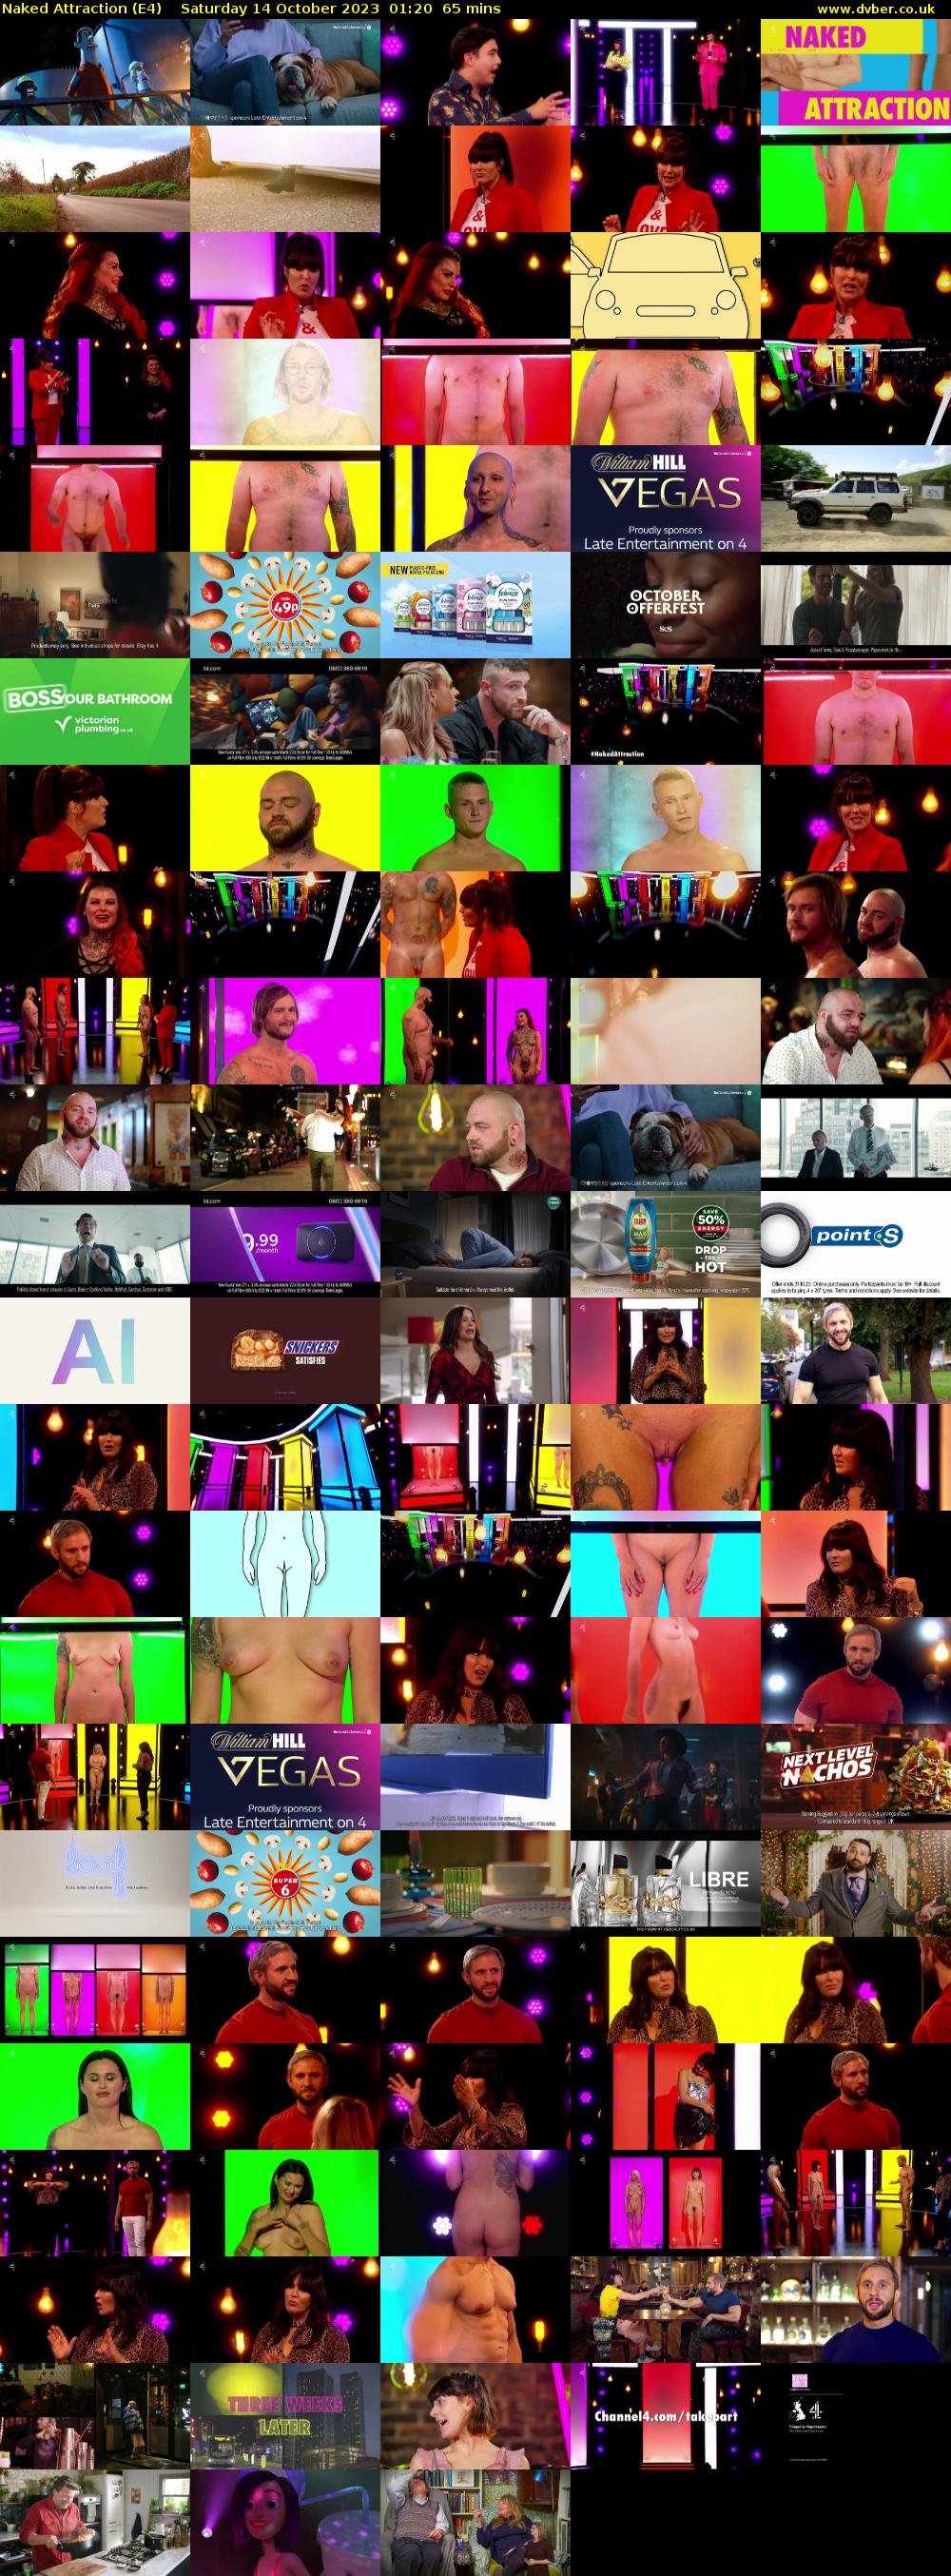 Naked Attraction (E4) Saturday 14 October 2023 01:20 - 02:25